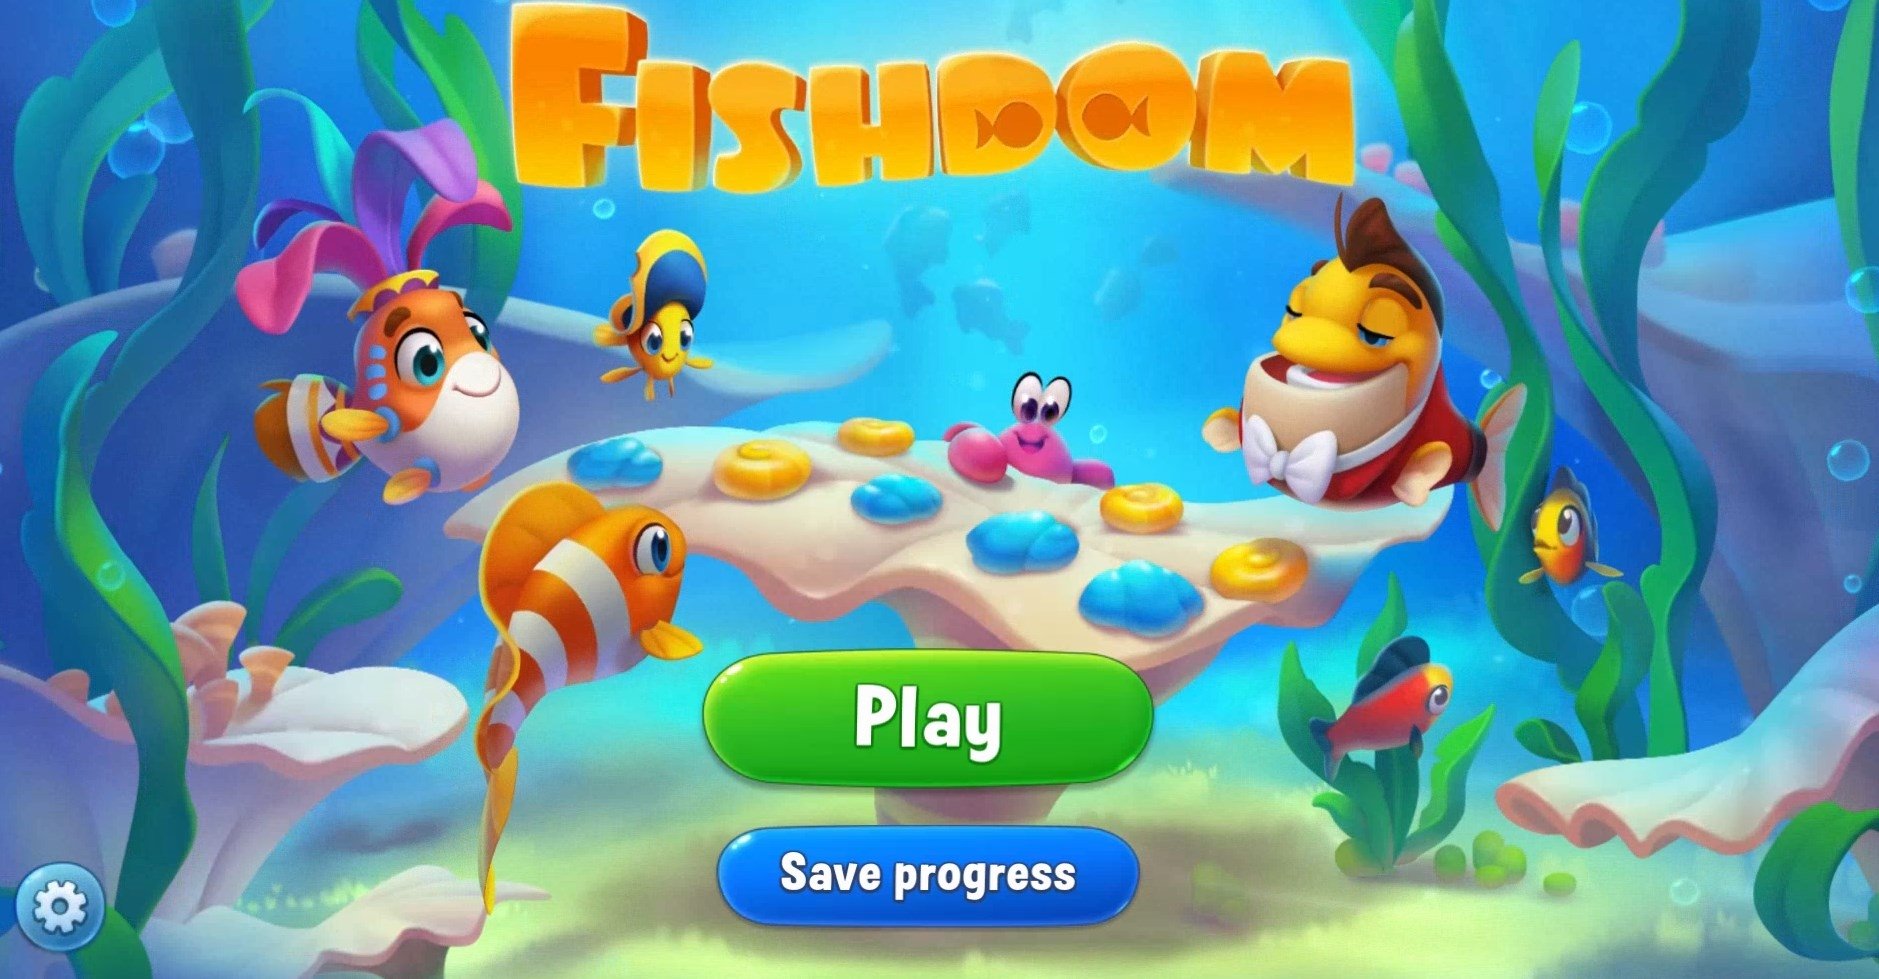 Fishdom is a puzzle game developed by Playrix for Microsoft Windows, Mac OS X, Android, and iOS. The game was launched 18 June 2008.